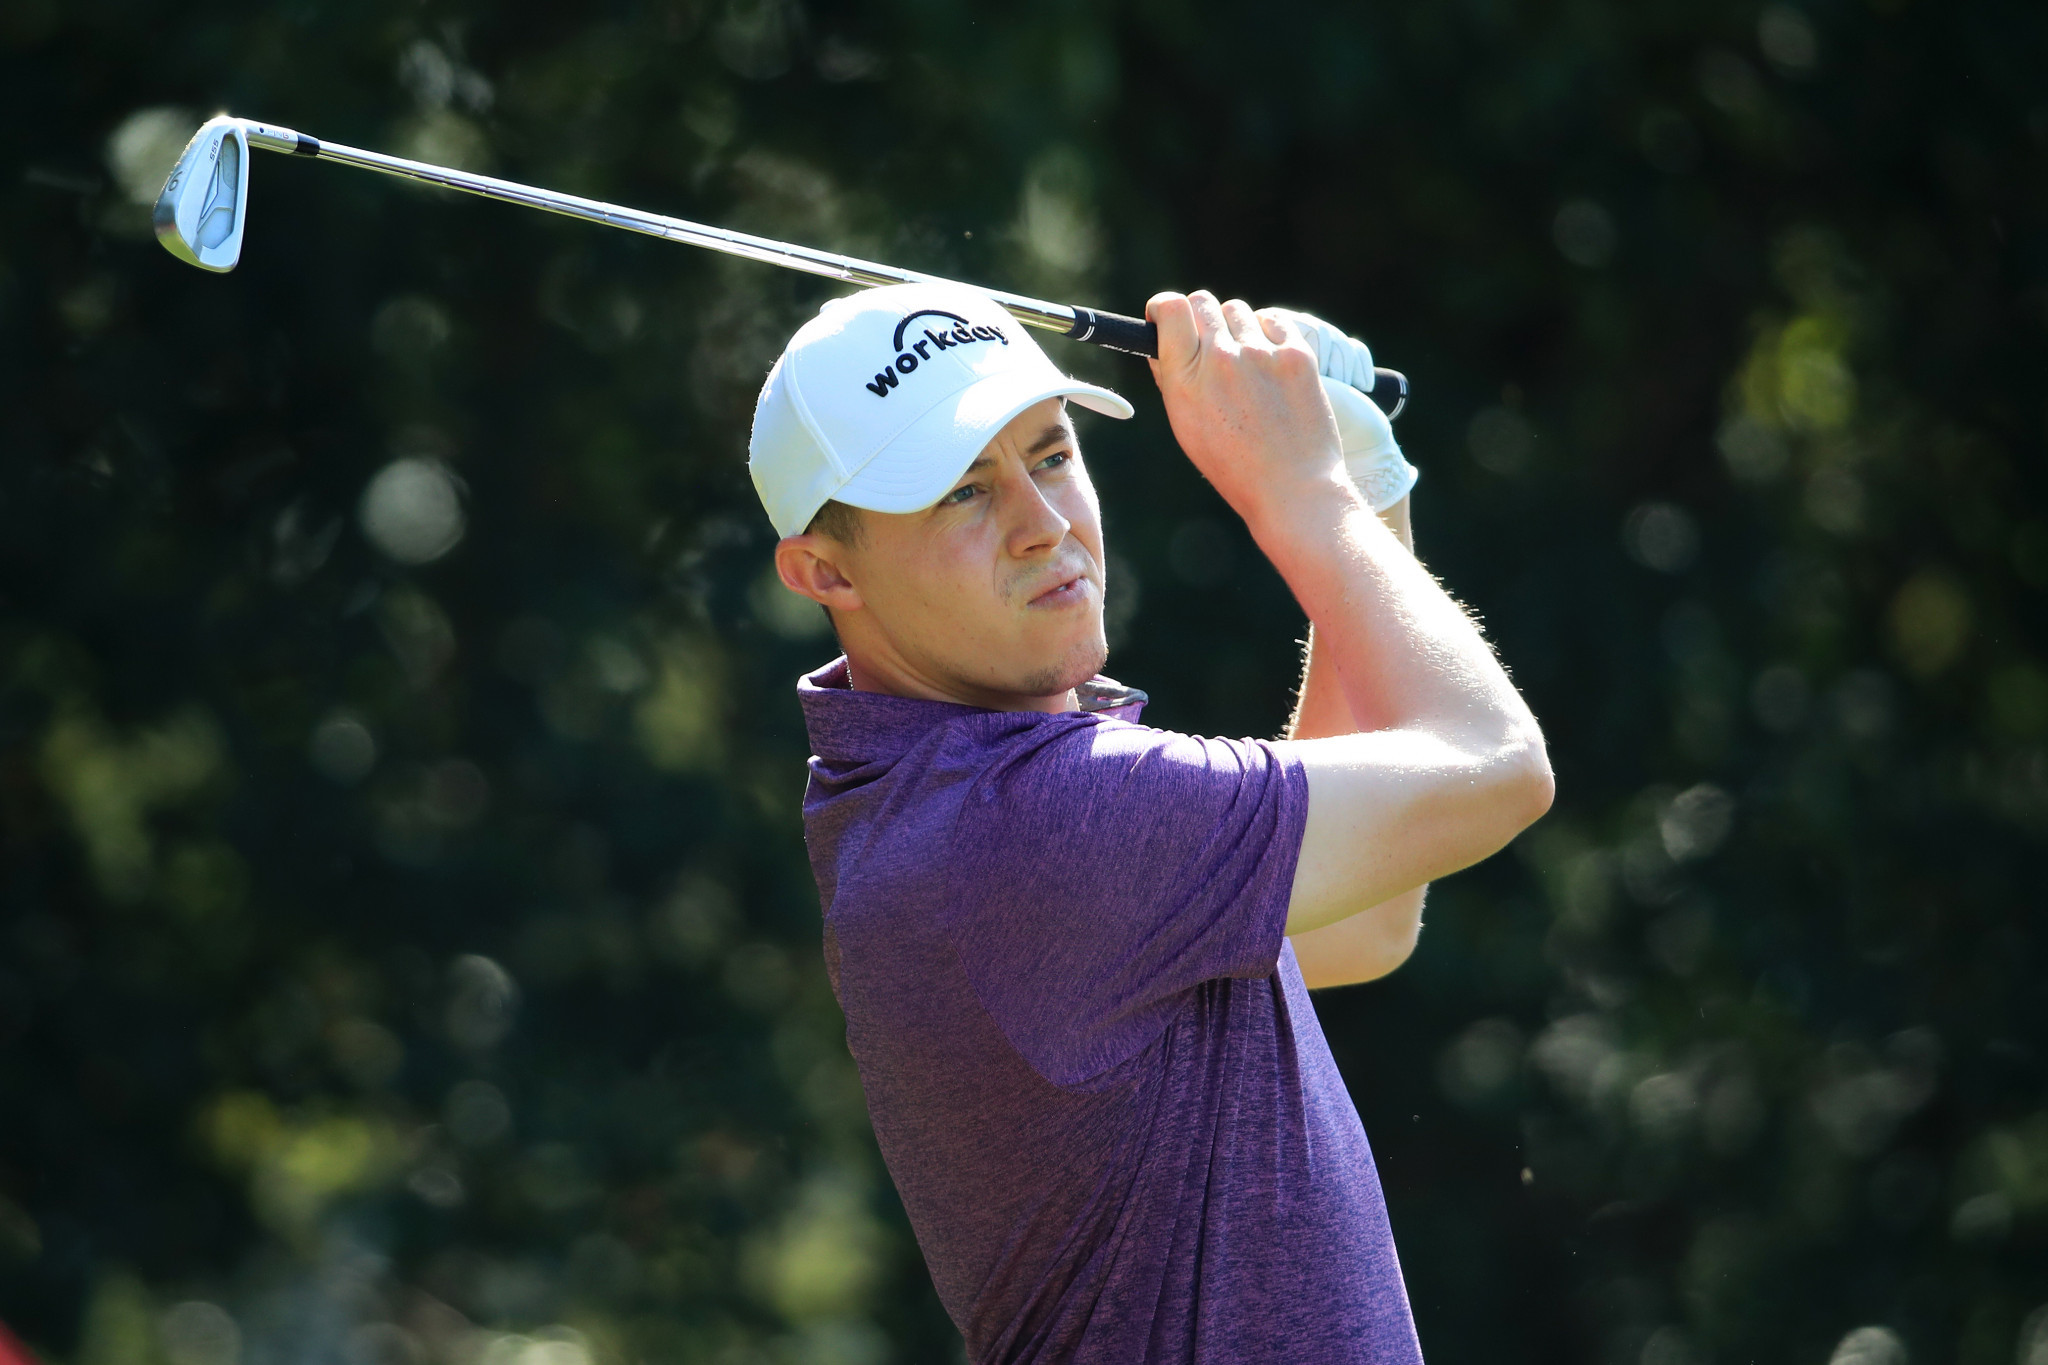 Staying nicely under the radar, Matthew Fitzpatrick has moved to the top of the leaderboard ©Getty Images